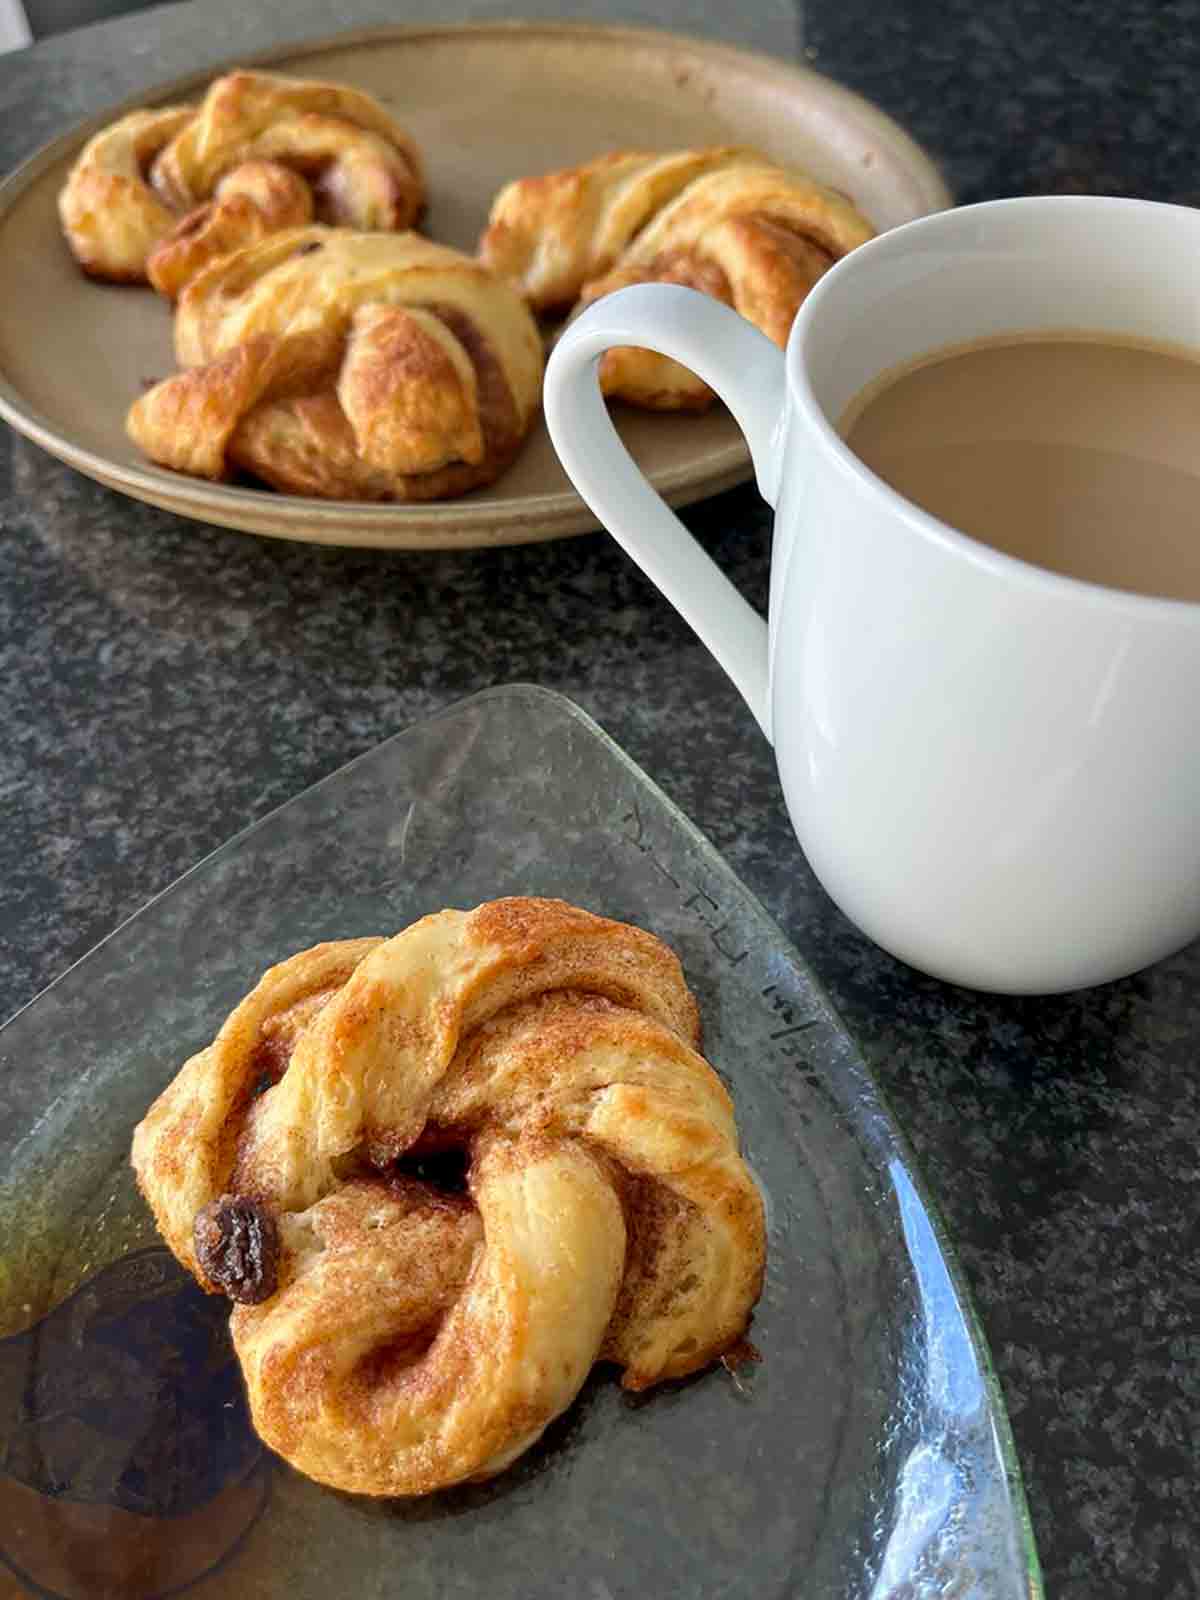 A plate with east cinnamon knots and a cup of coffee